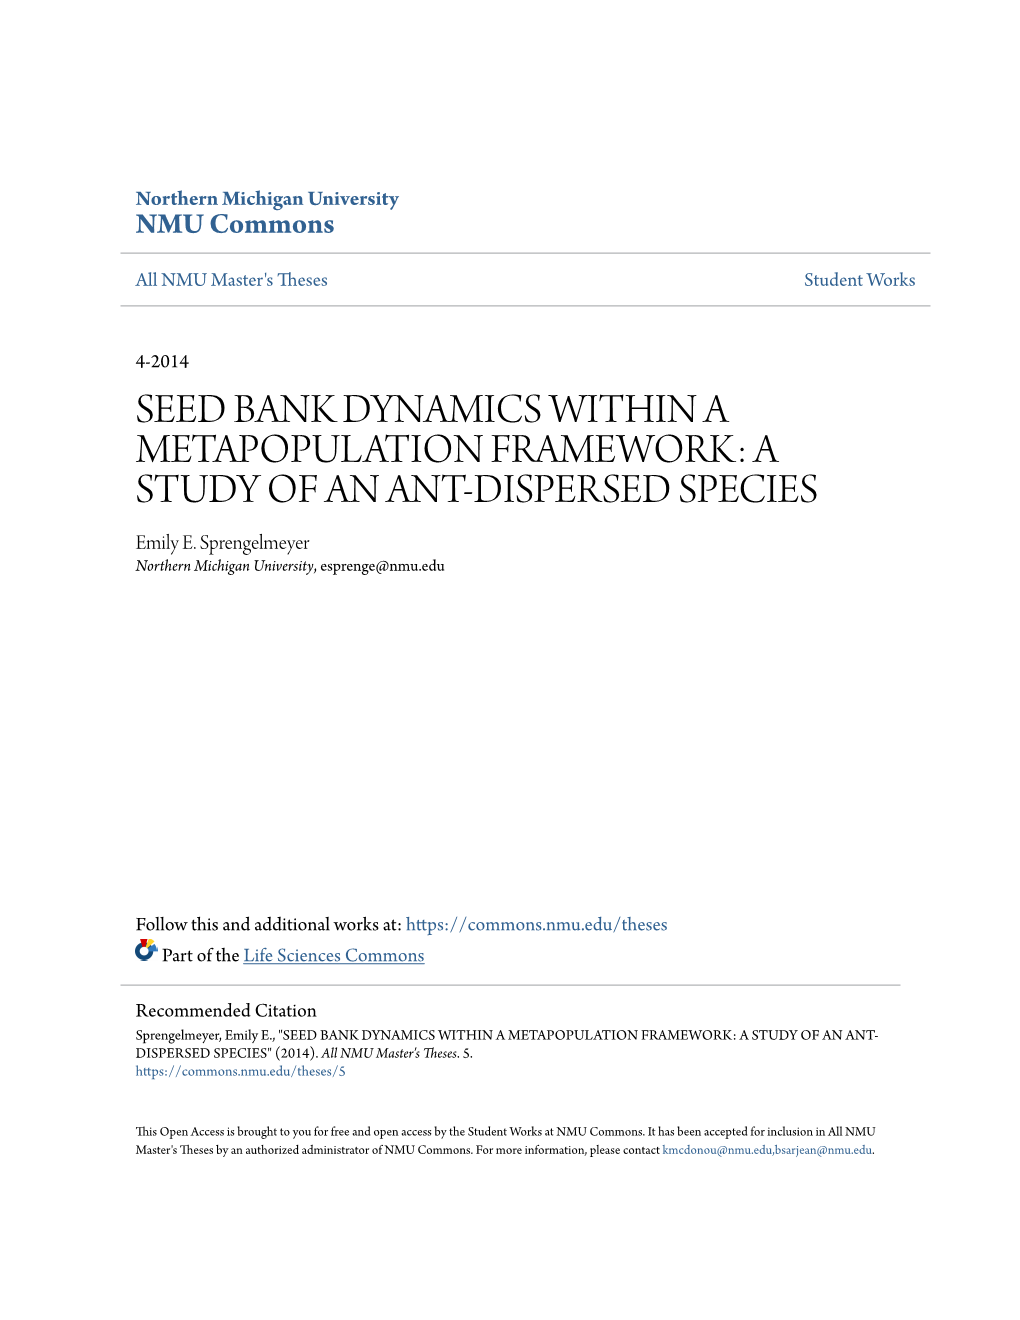 SEED BANK DYNAMICS WITHIN a METAPOPULATION FRAMEWORK: a STUDY of an ANT-DISPERSED SPECIES Emily E